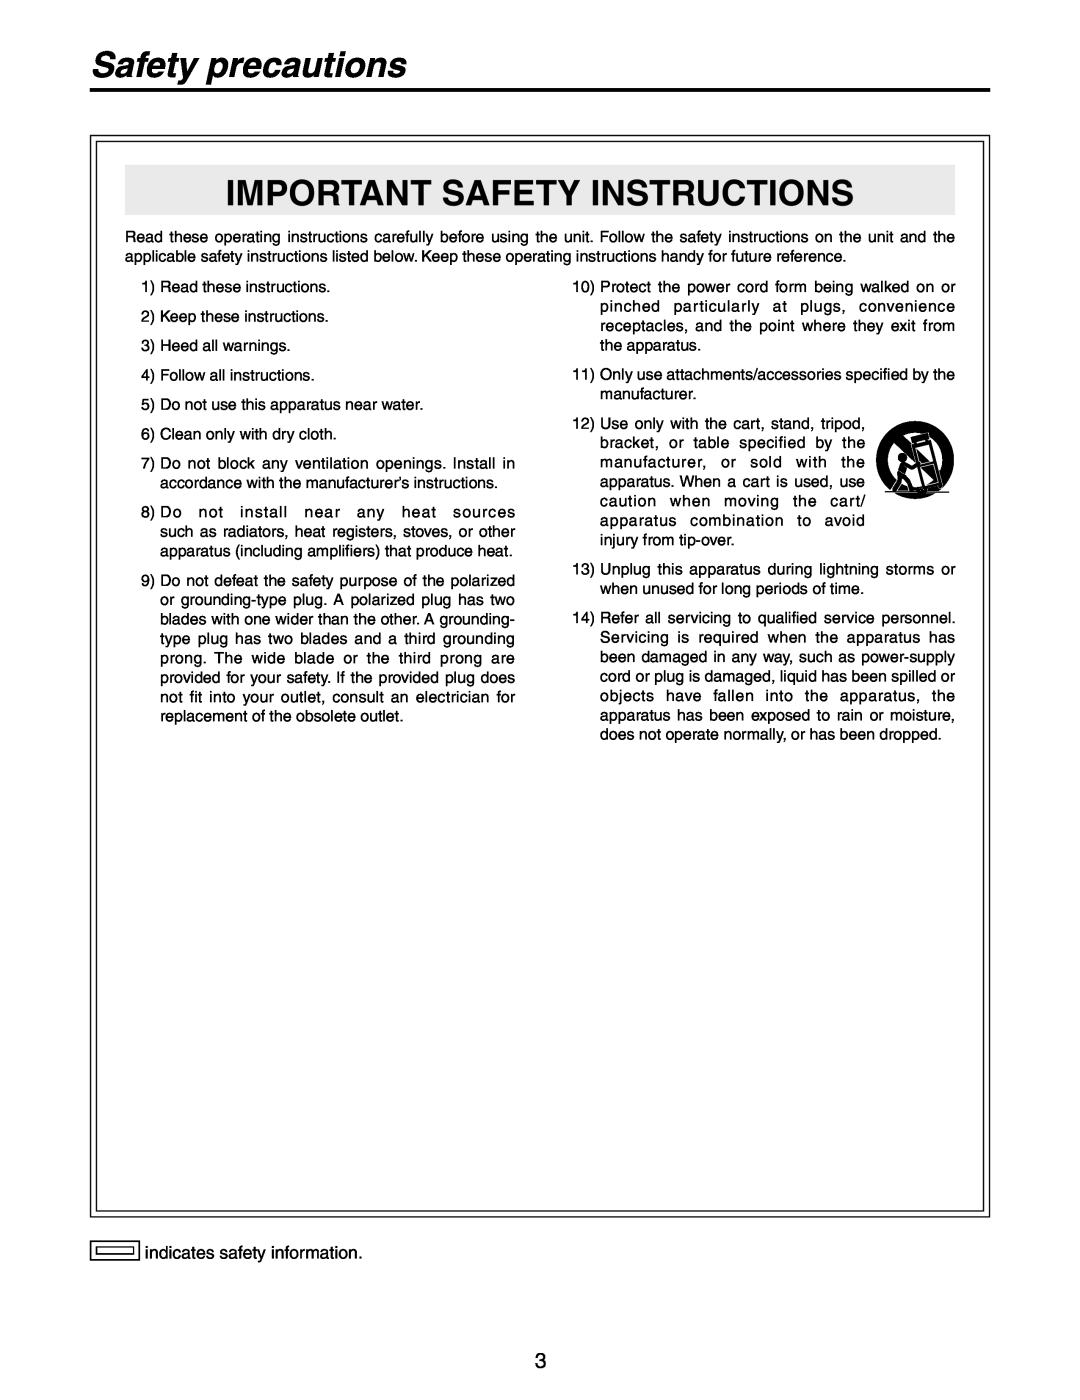 Panasonic AW-RP555N manual Safety precautions, Important Safety Instructions, indicates safety information 